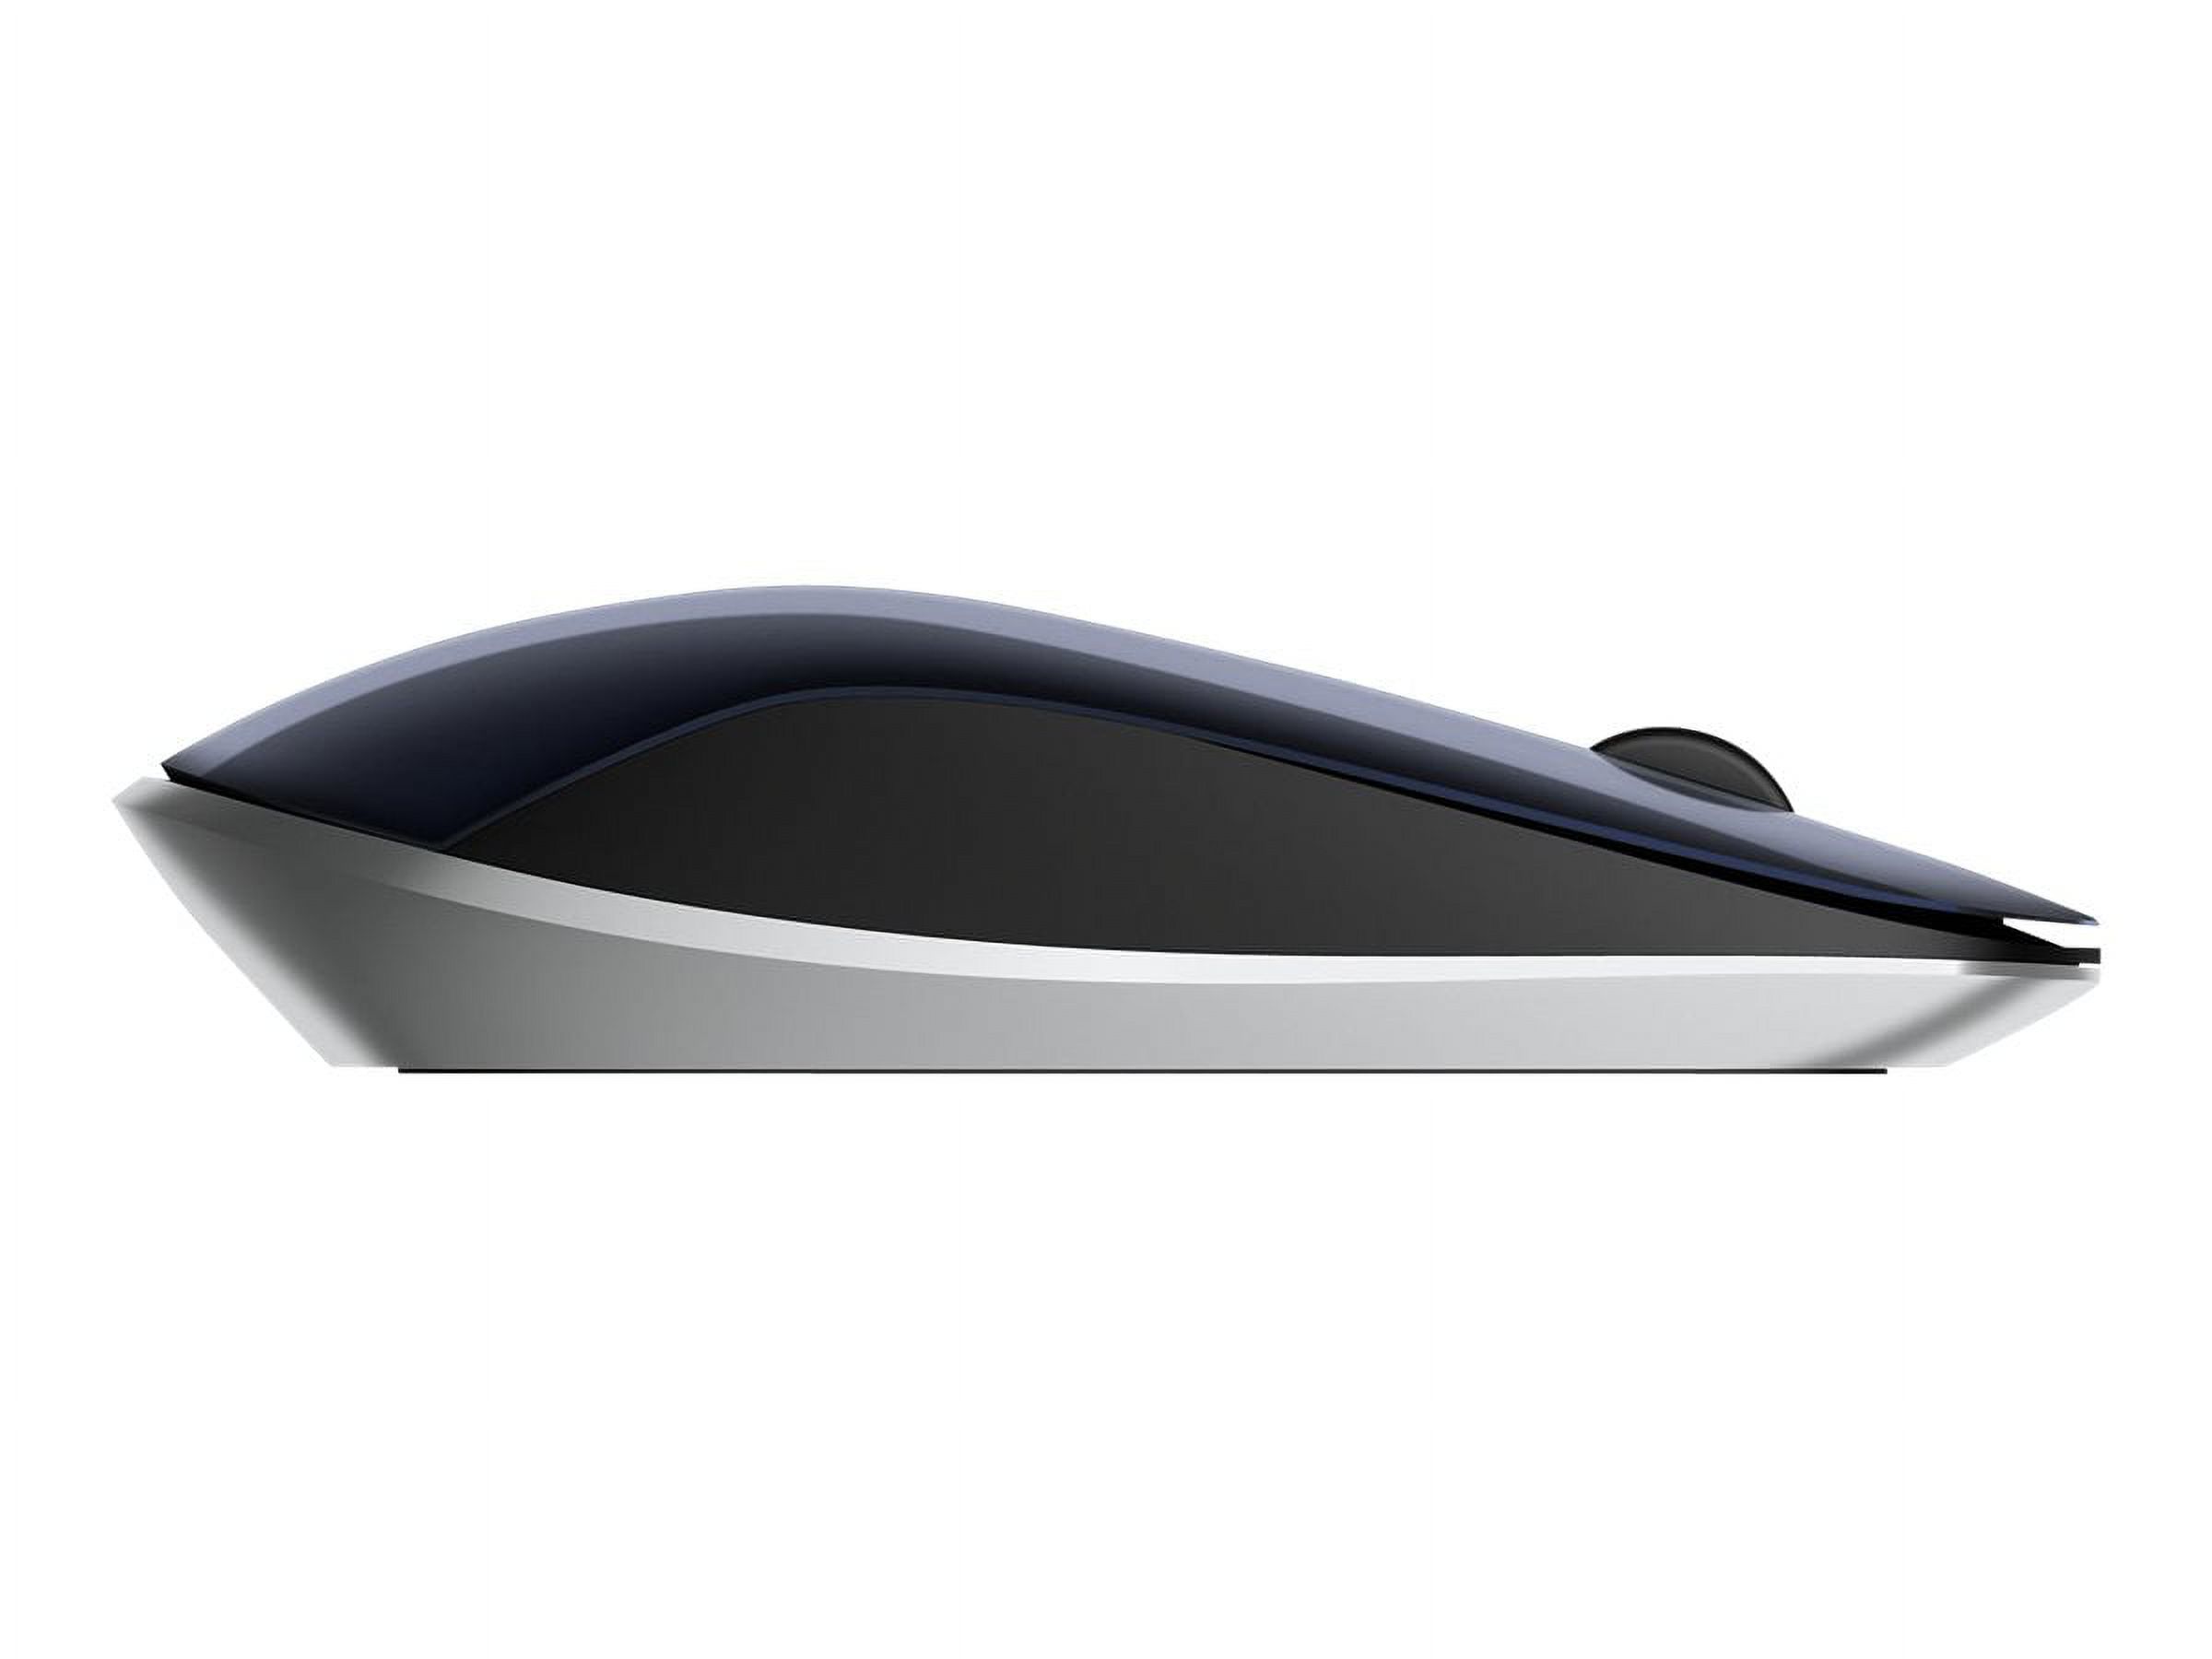 HP Wireless Mouse Z4000 (Blue) - image 5 of 5